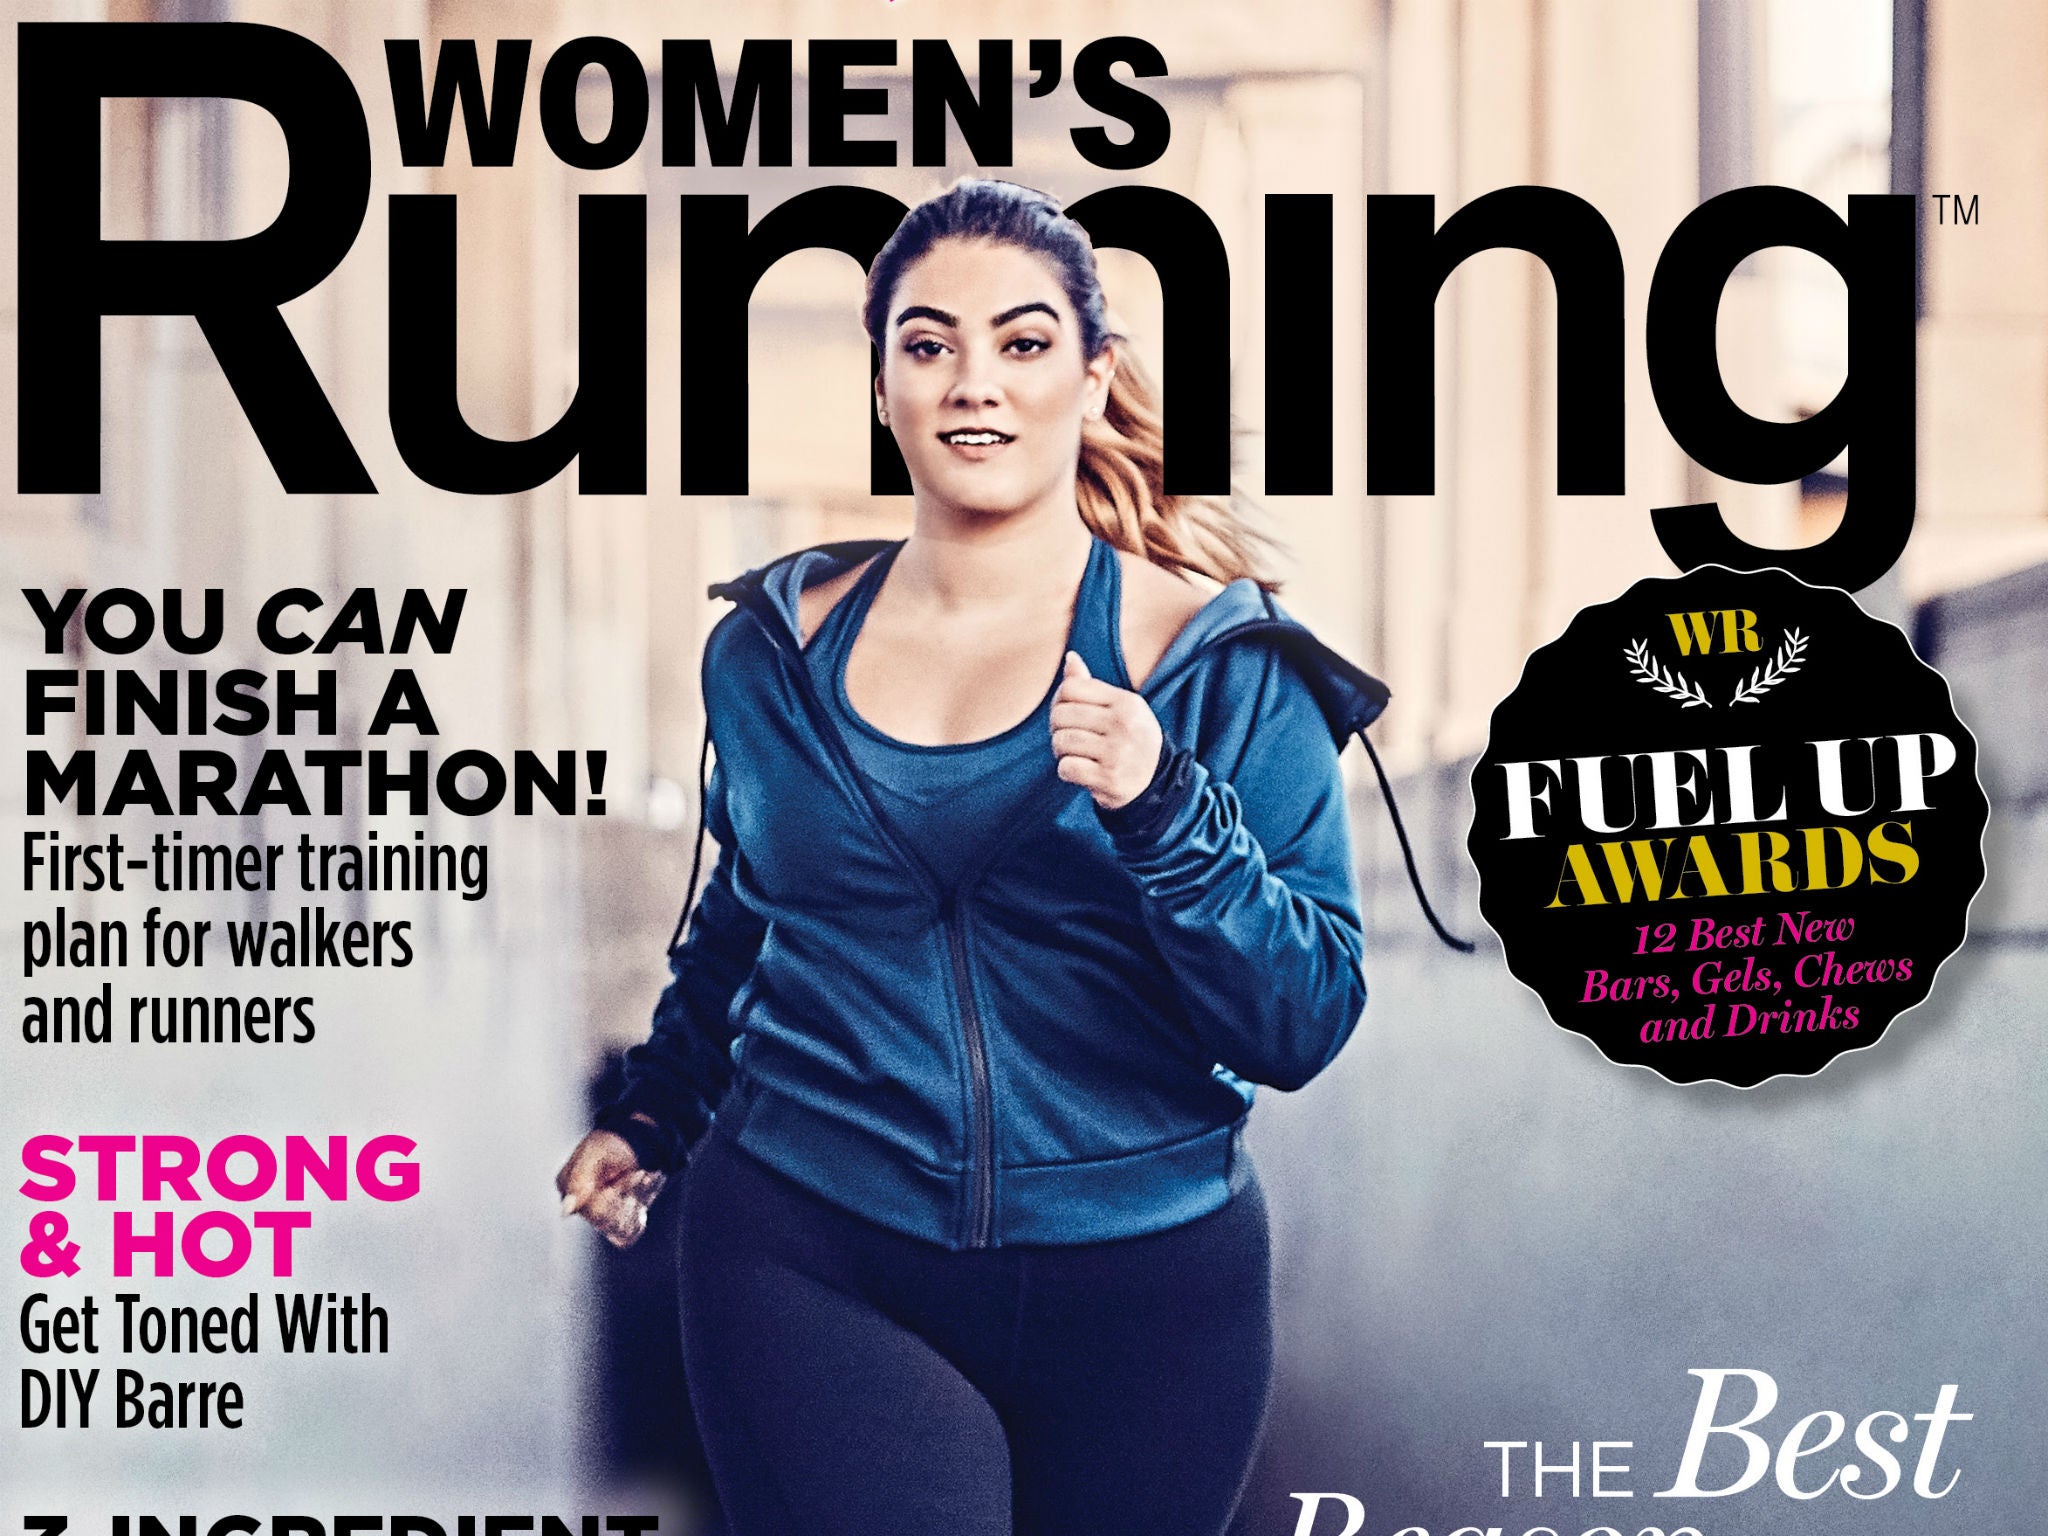 Nadia Aboulhosn on the April cover of US magazine Women's Running